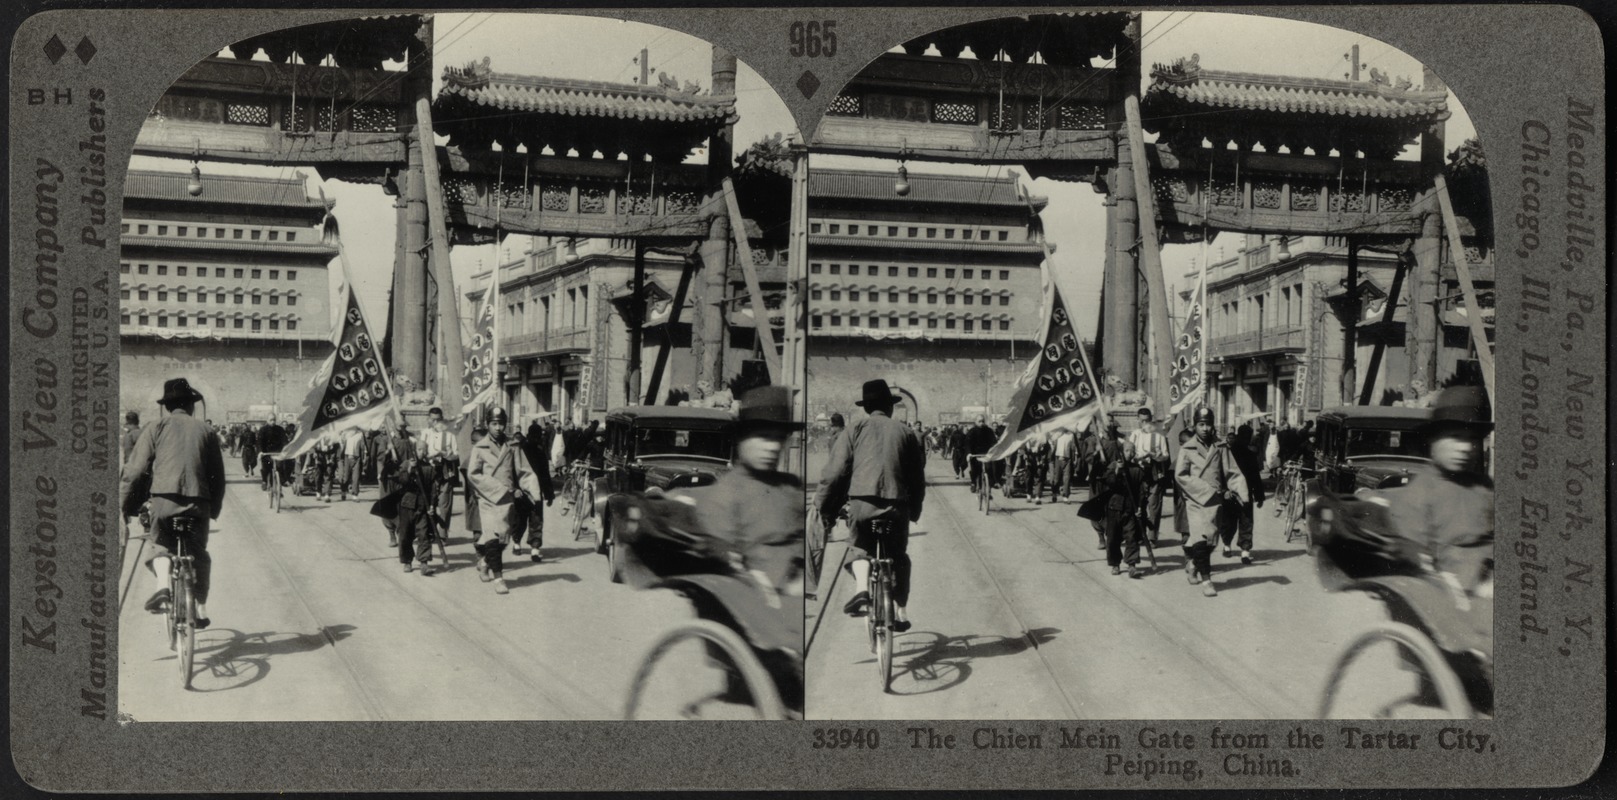 The Chien Mein gate from the Tartar City, Peiping, China